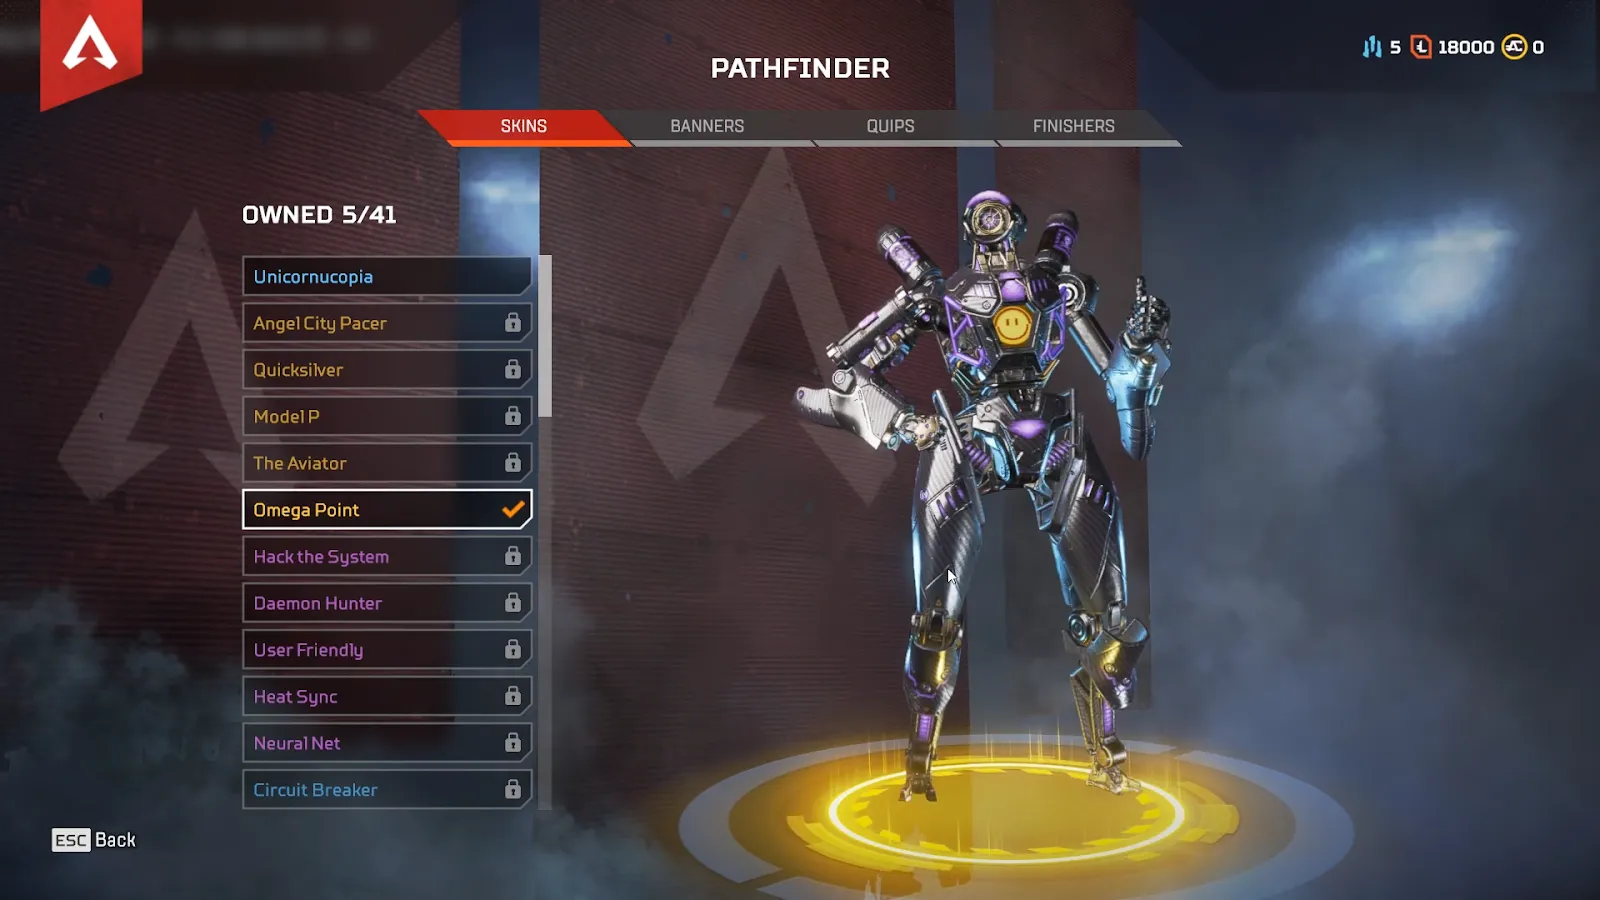 The Omega Point skin in Apex Legends